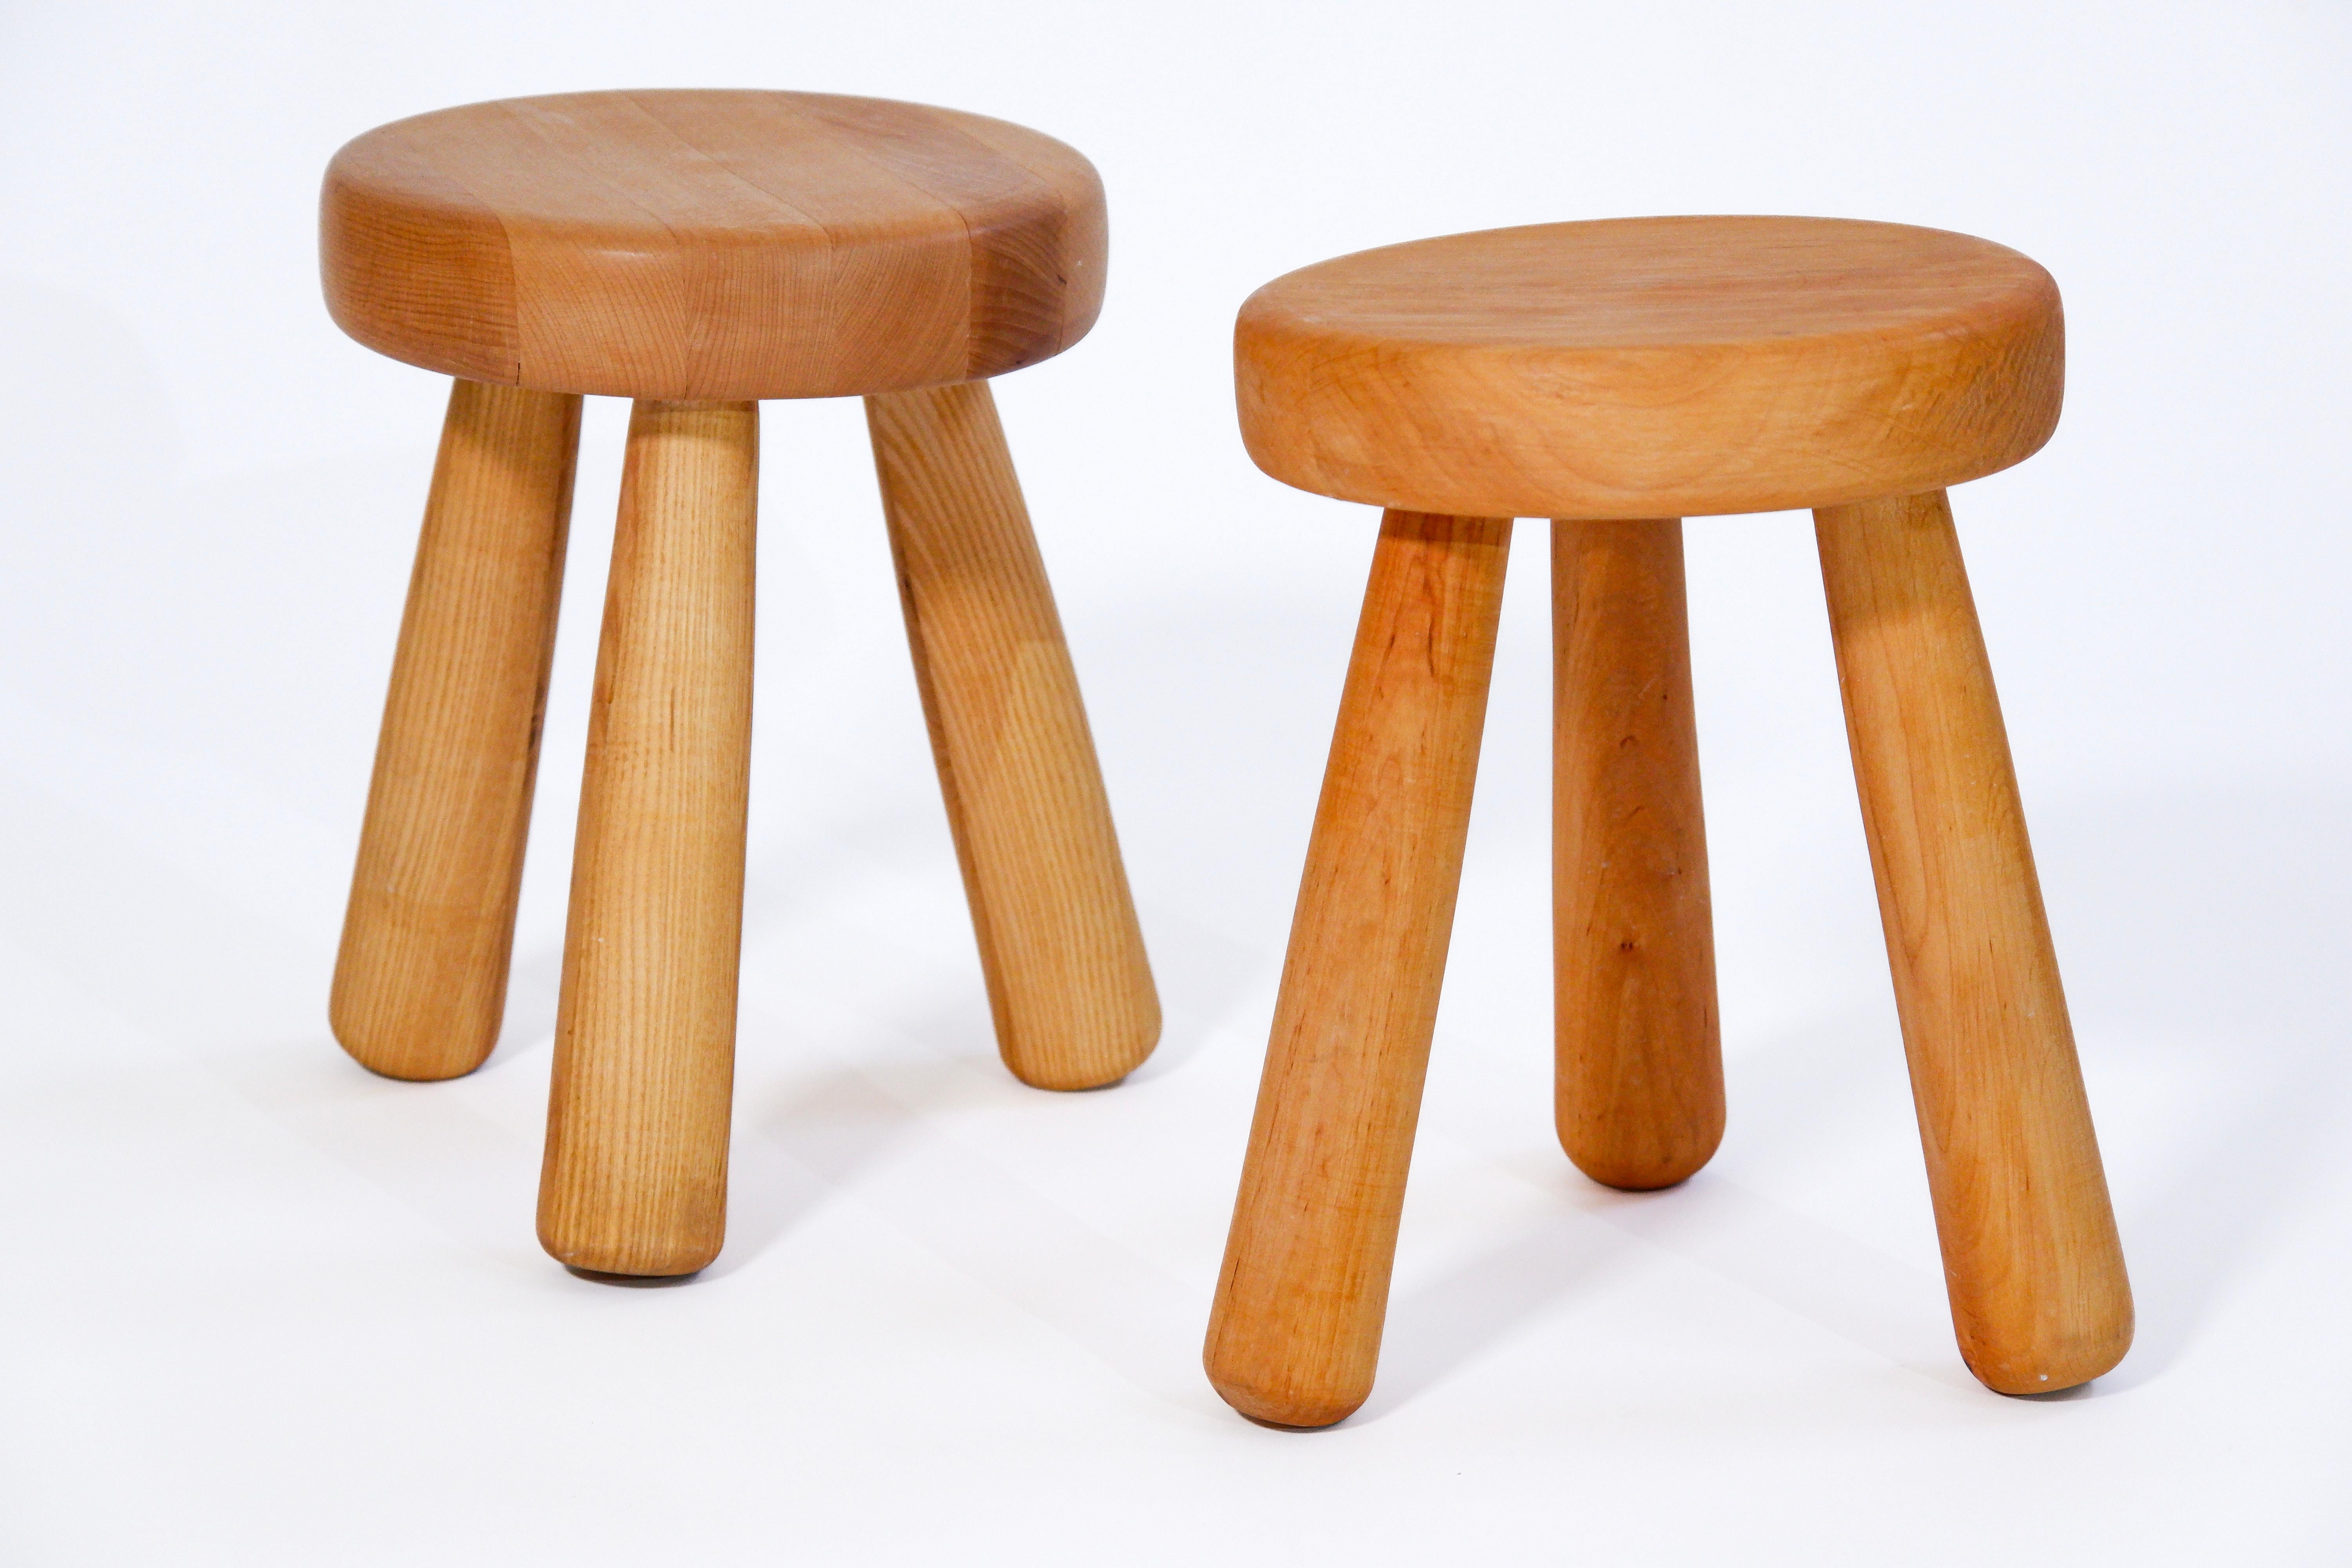 Pair of Ingvar Hildingsson stool in different size and materials. 
1. Hingvar Hildingsson stool made in birch circa 1980. Produced in Sweden, the stool is stamp and marked by the artist. Dimensions : H: 34 cm / L: 24 cm.
2. Rare mix wood Ingvar